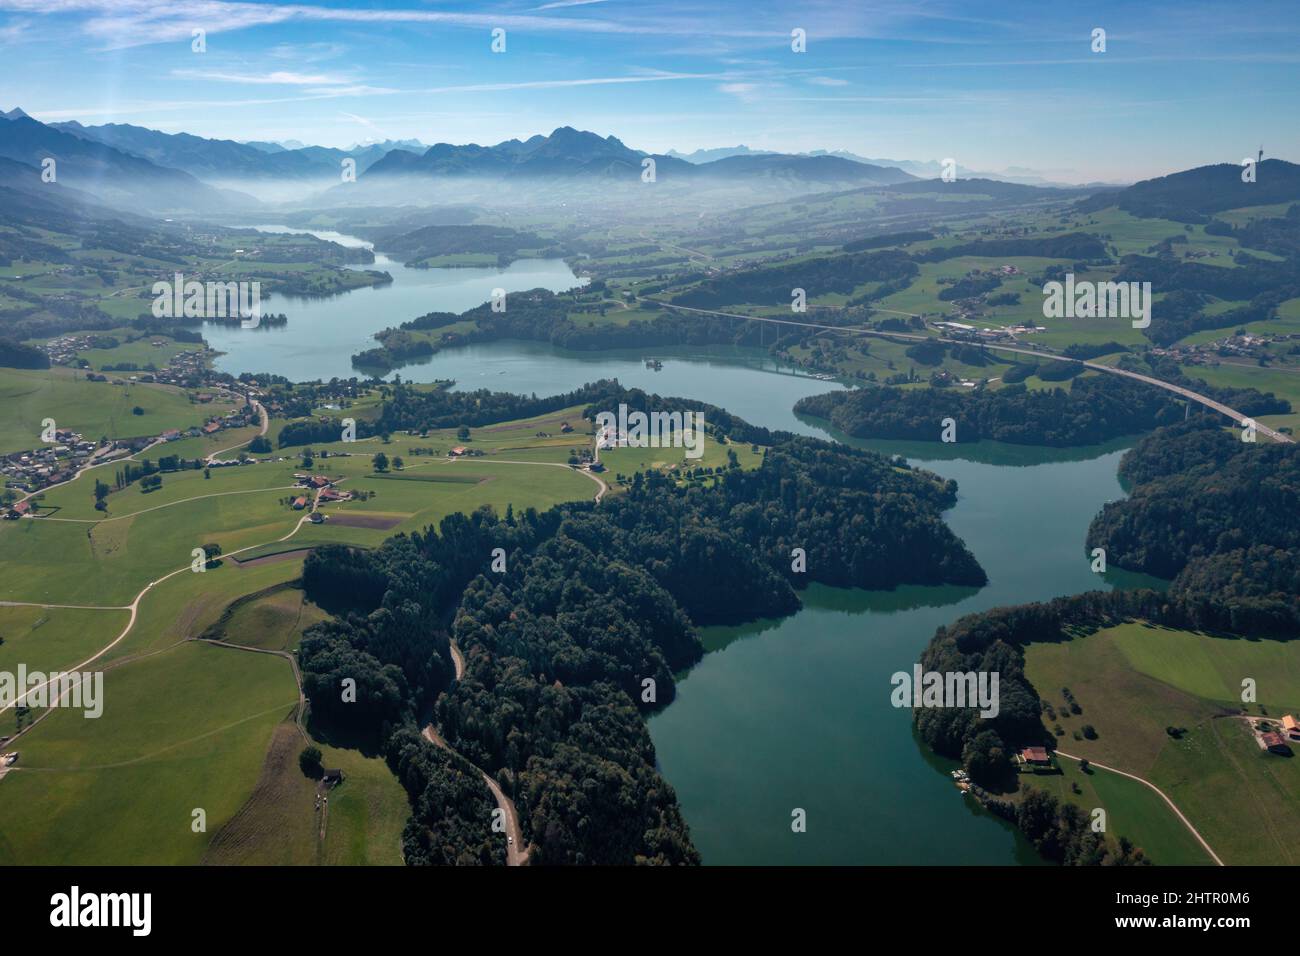 Aerial view of the Lac de la Gruyere, a lake in the canton of Fribourg, Switzerland. The lake winds through the hills of the region and is surrounded by a layer of trees. High quality photo Stock Photo